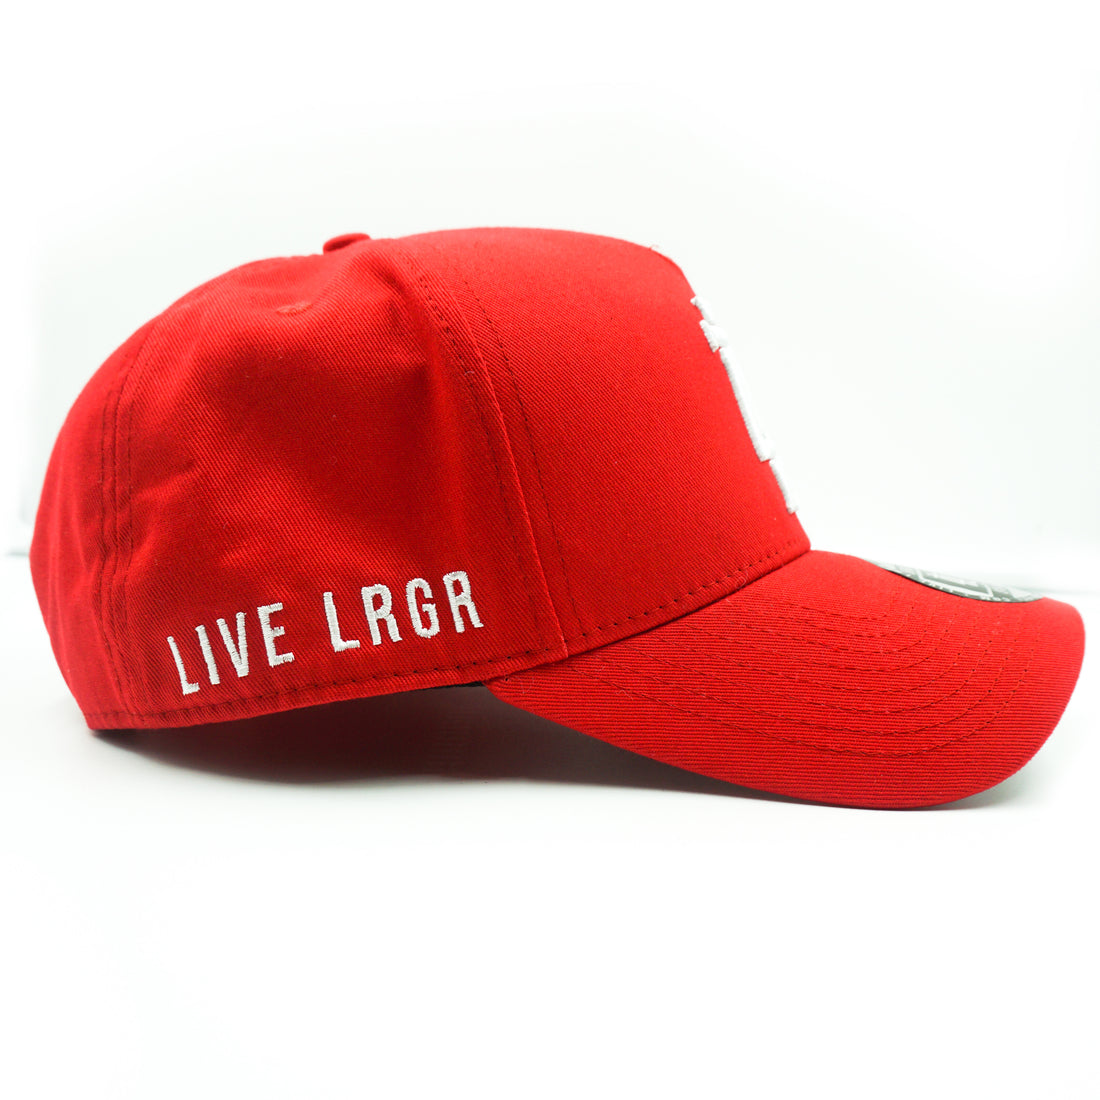 A-FRAME HAT - RED